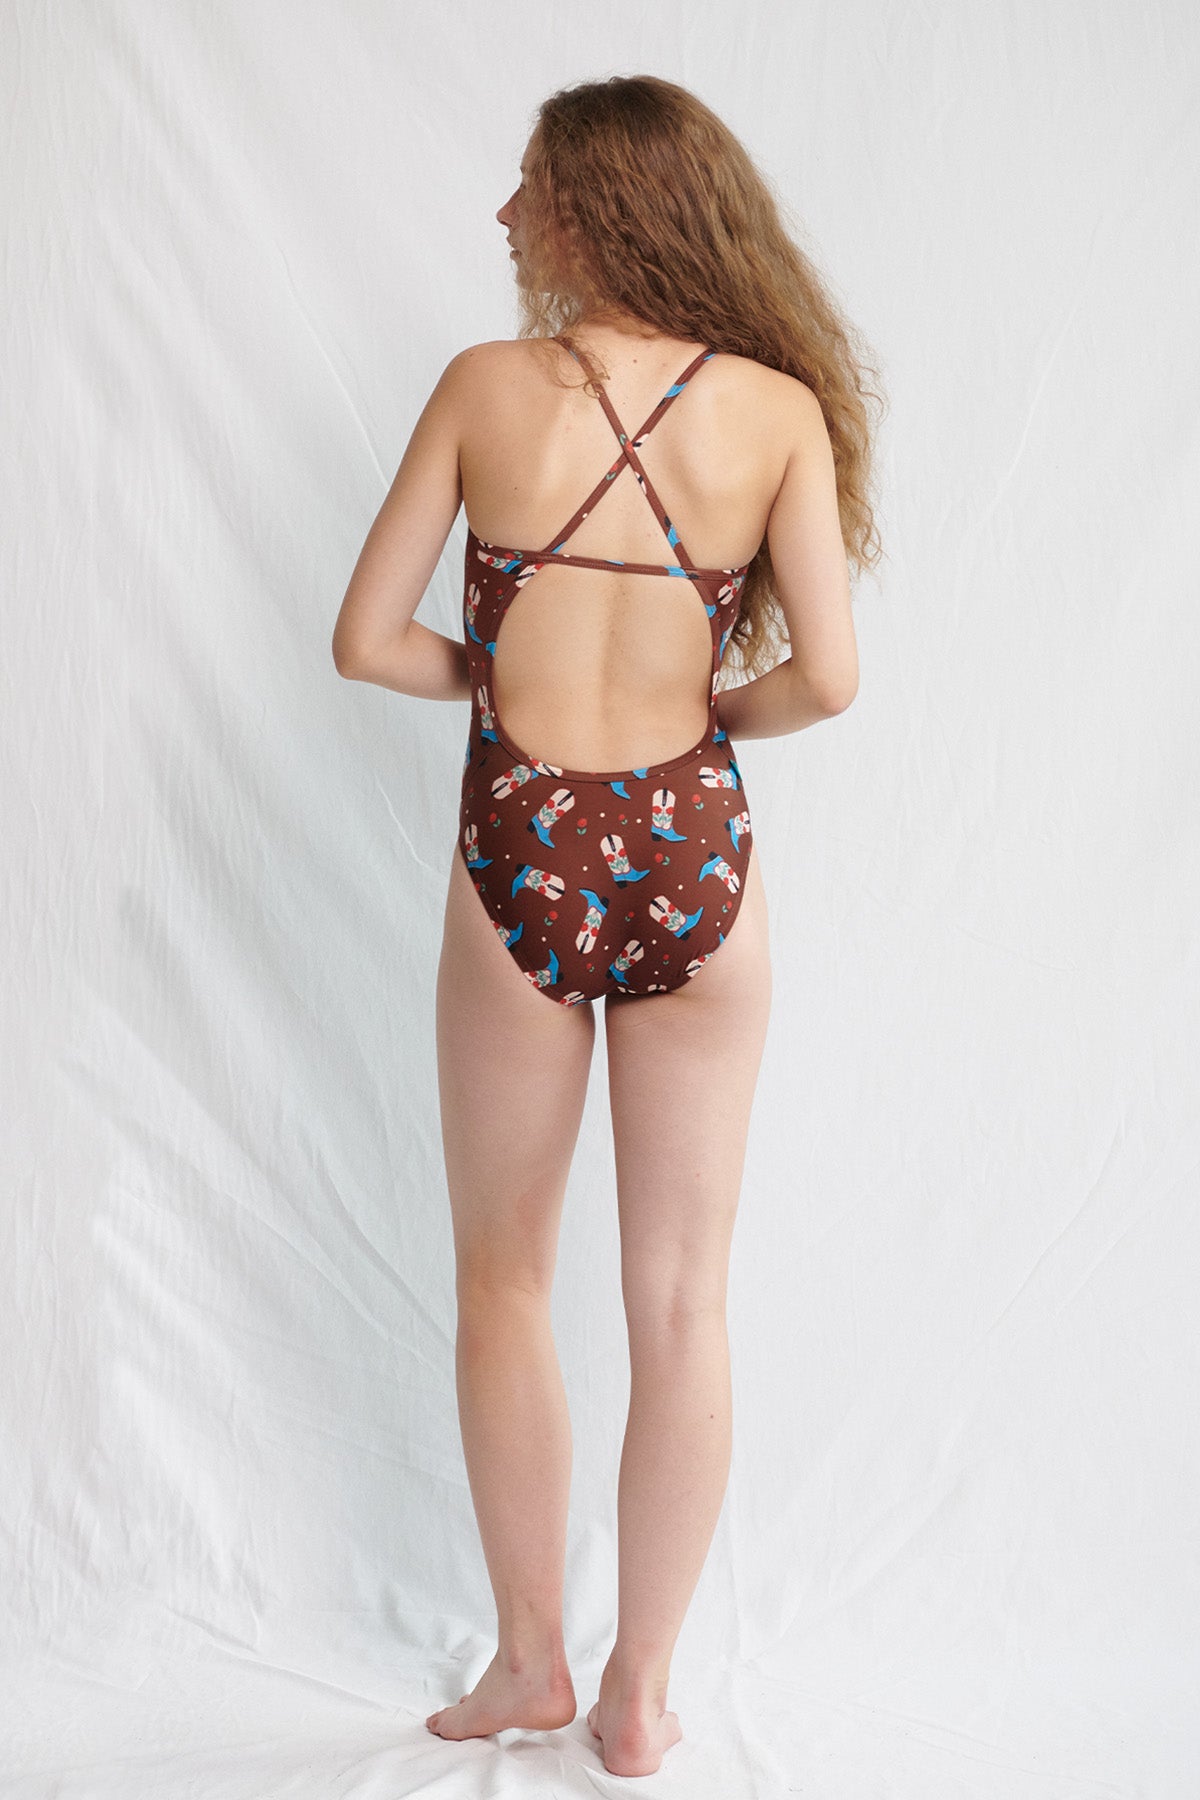 Rosy western boots Swimsuit - Rich Mahogany